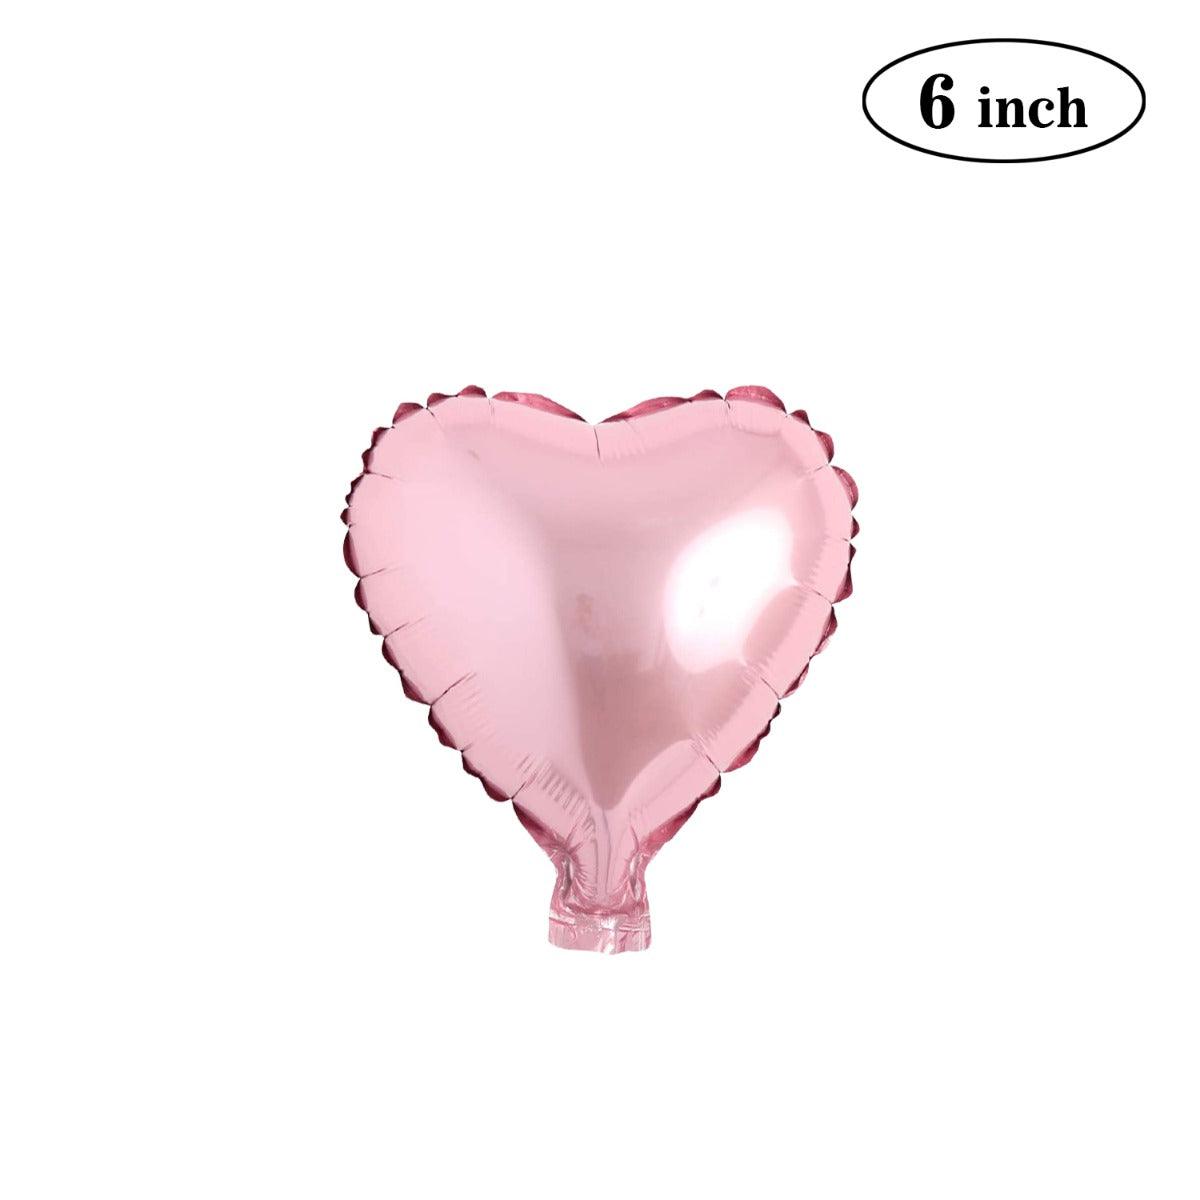 PartyCorp 6 Inch Pink Heart Foil Balloon, 1 pc